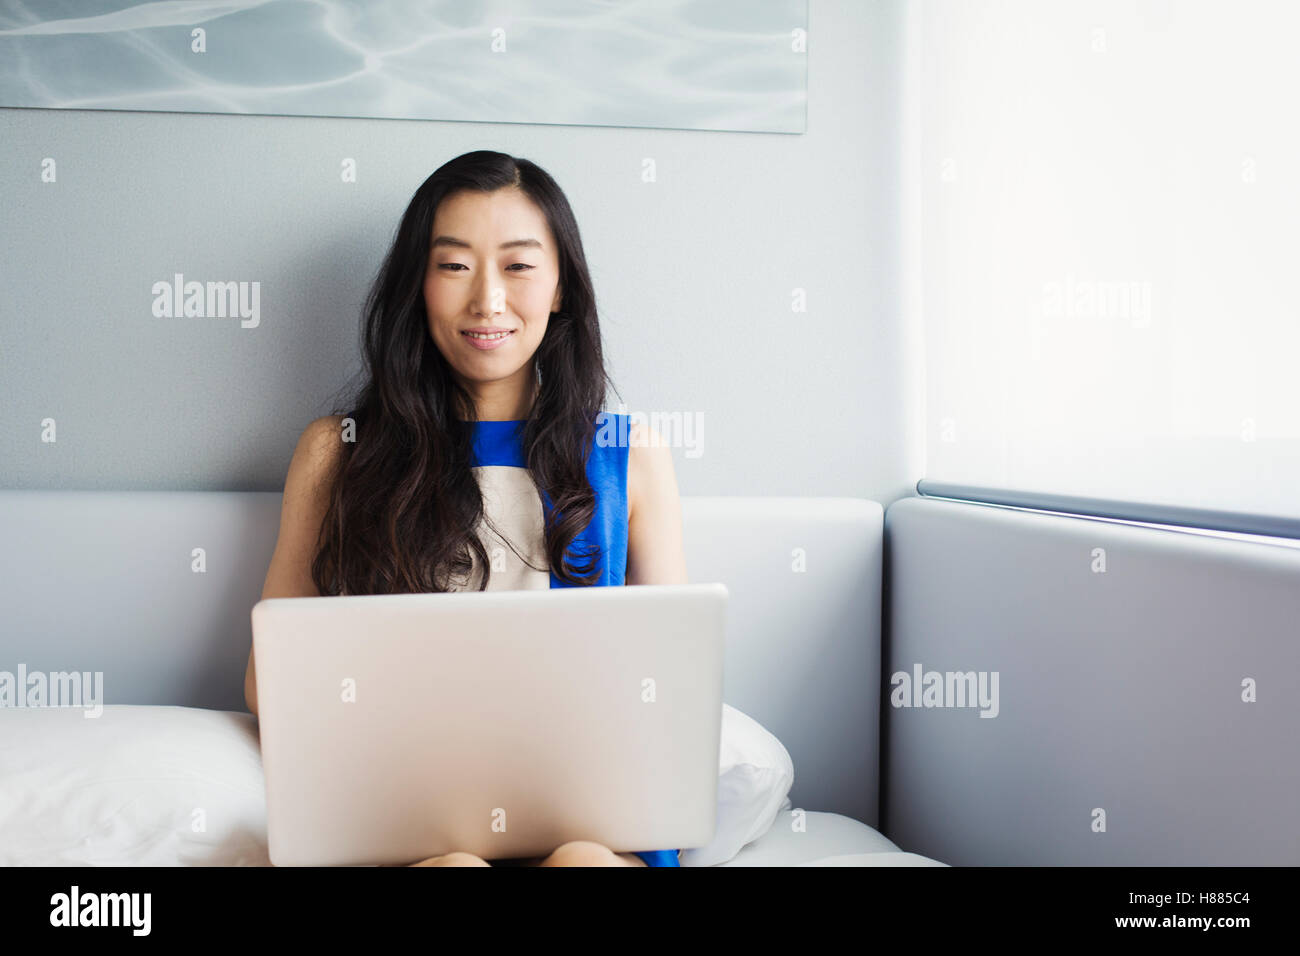 A business woman preparing for work, sitting on a bed using her laptop computer. Stock Photo